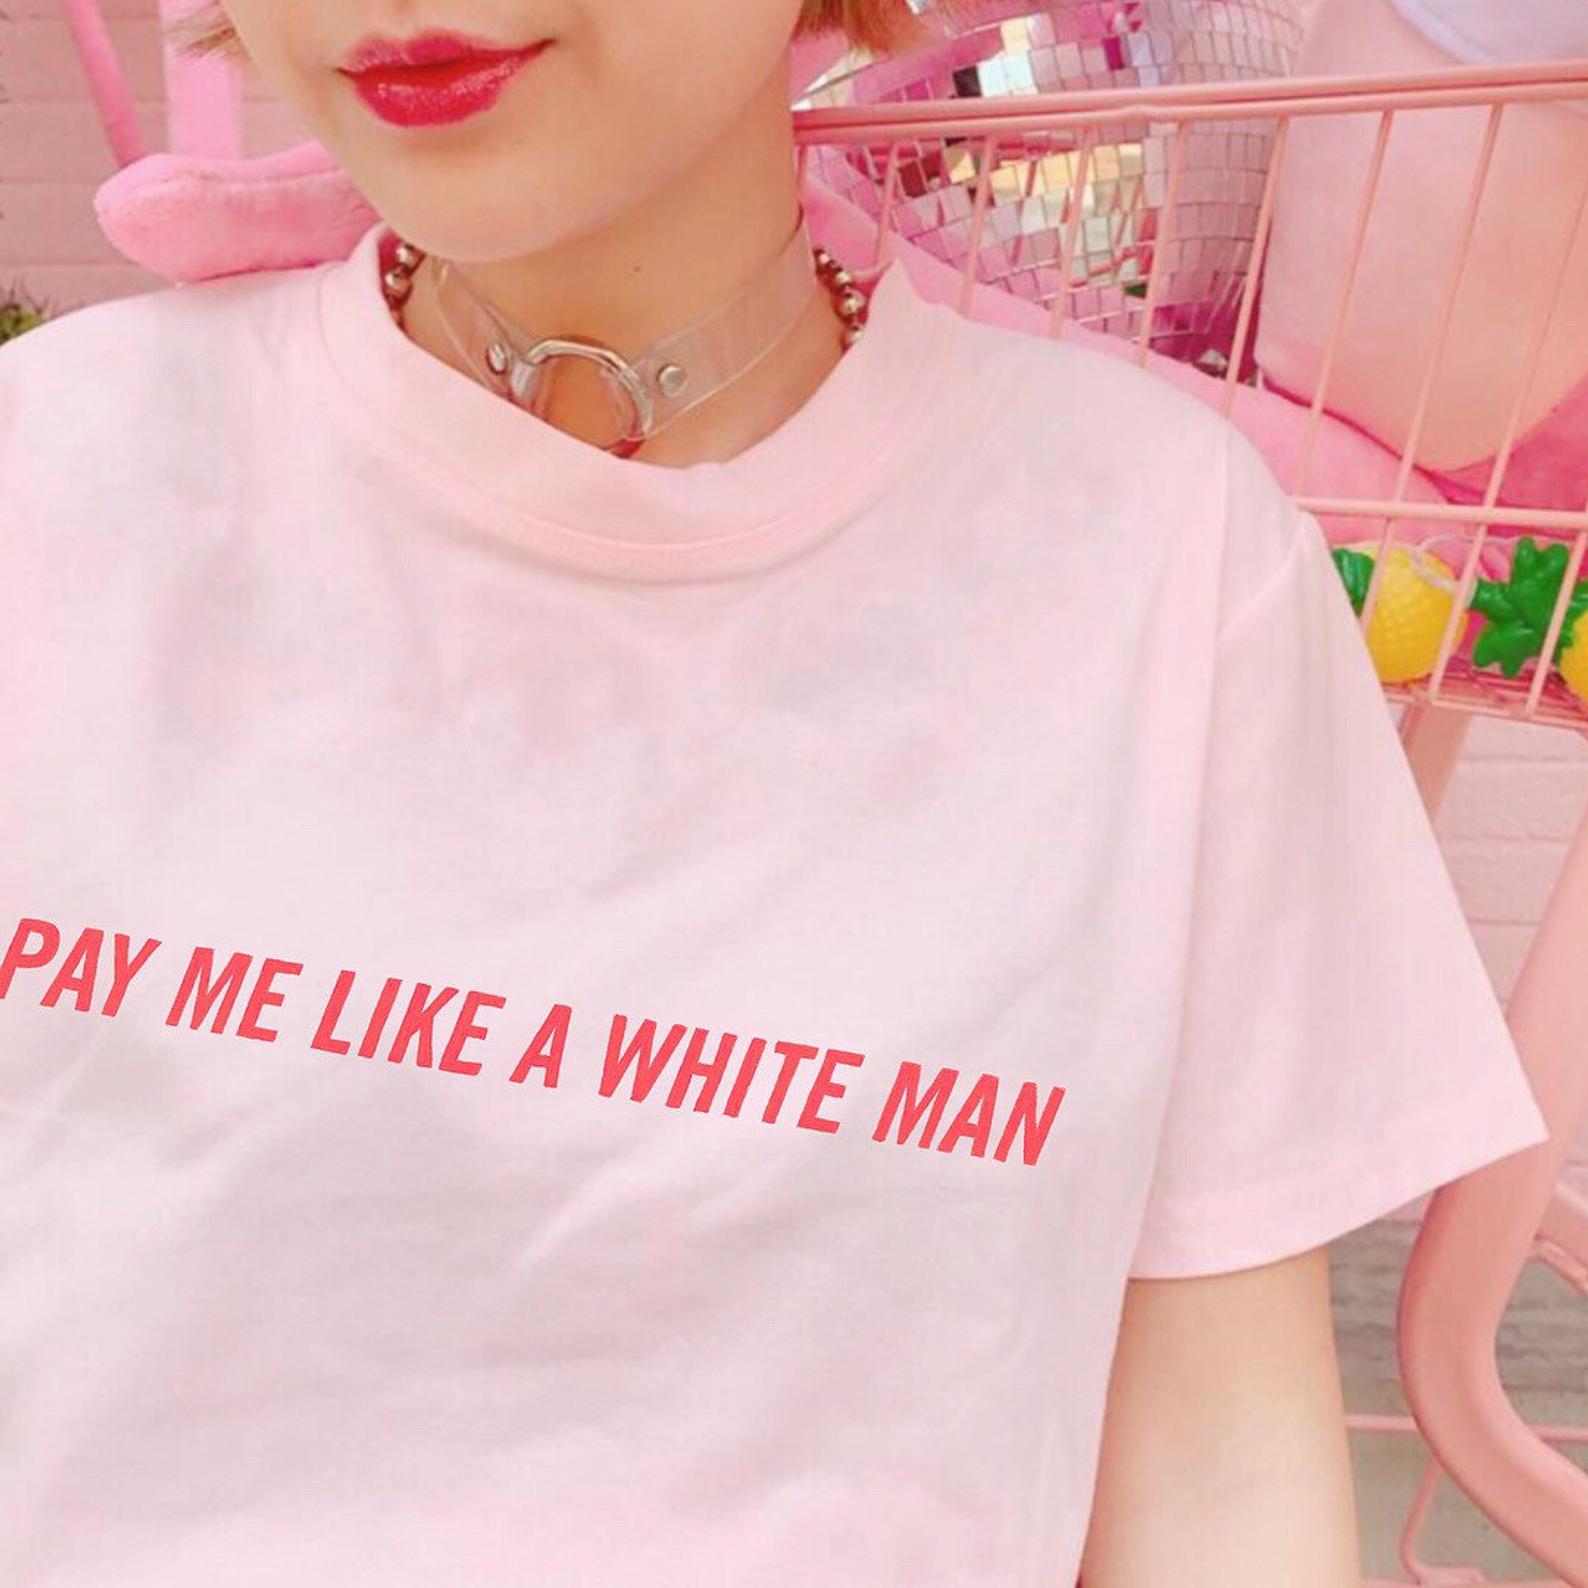 Feminist shirt advocating pay equality, featuring 'Pay Me Like a White Man' slogan